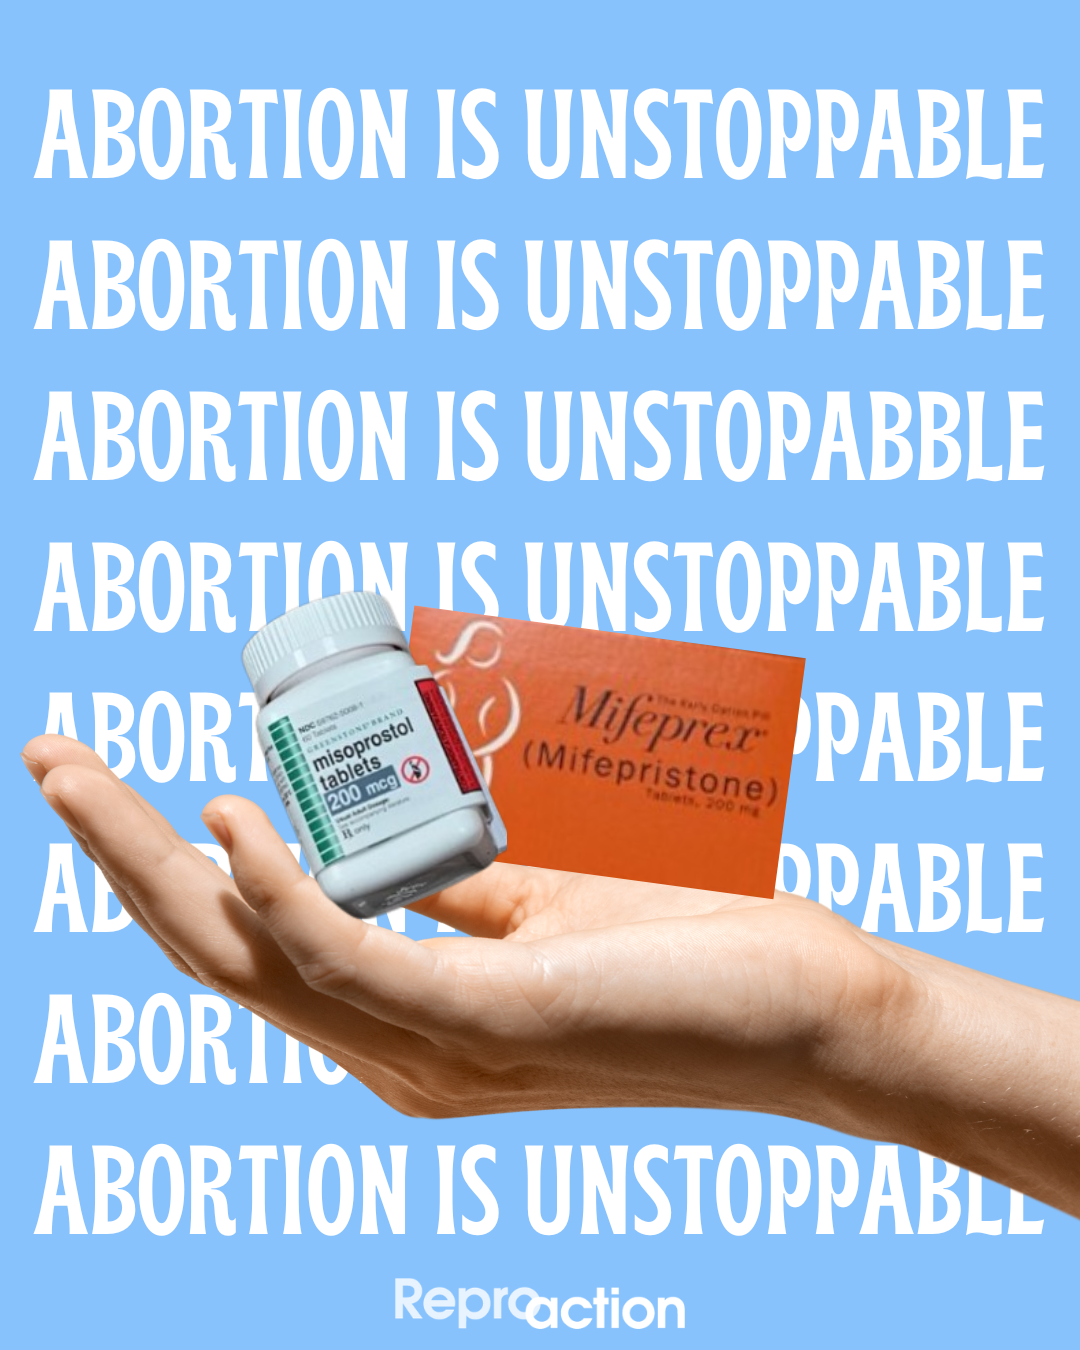 A blue background with a hand holding mifepristone and misoprostol reads “abortion is unstoppable” repeated in white text. Below this is the Reproaction logo in white.